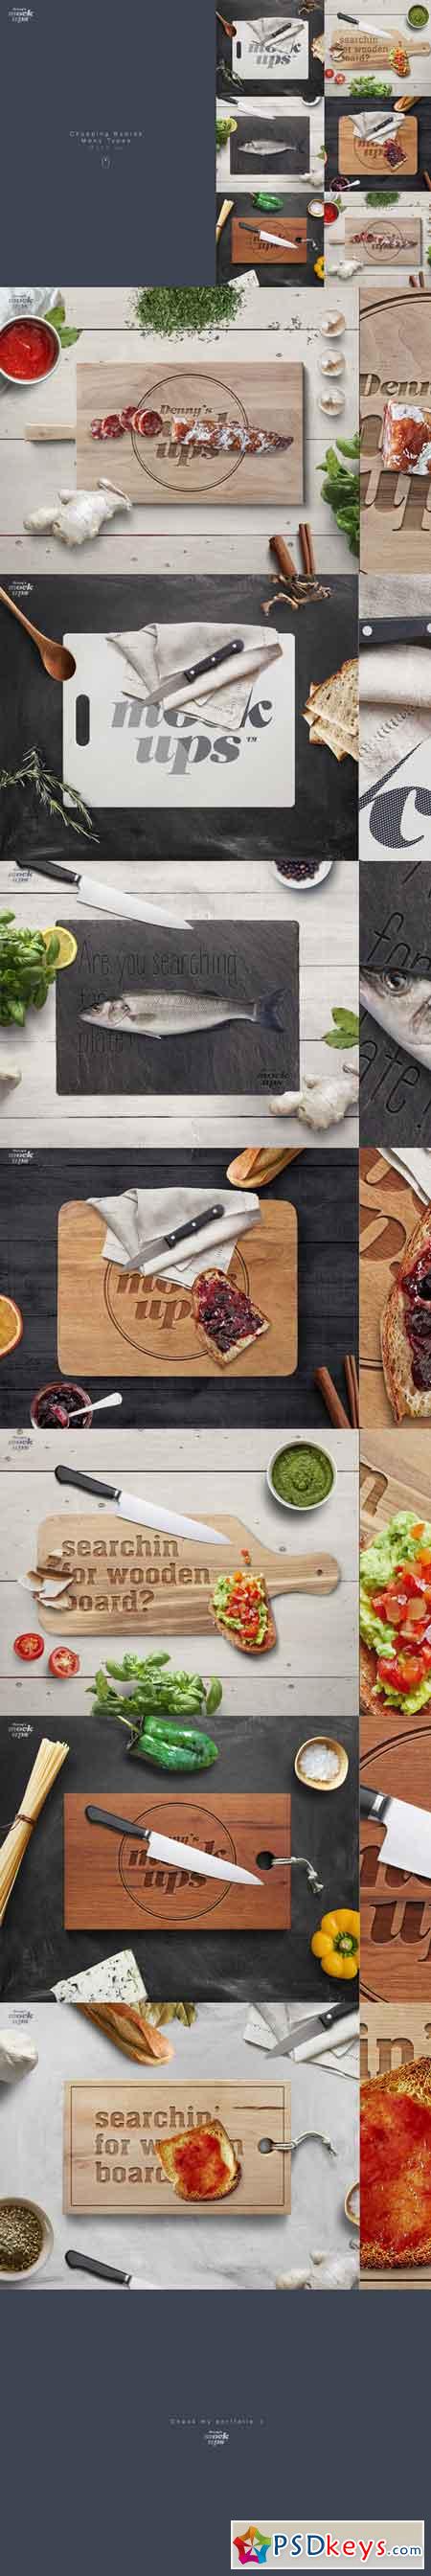 Download Cutting Board Many Types Mockup 791229 » Free Download ...